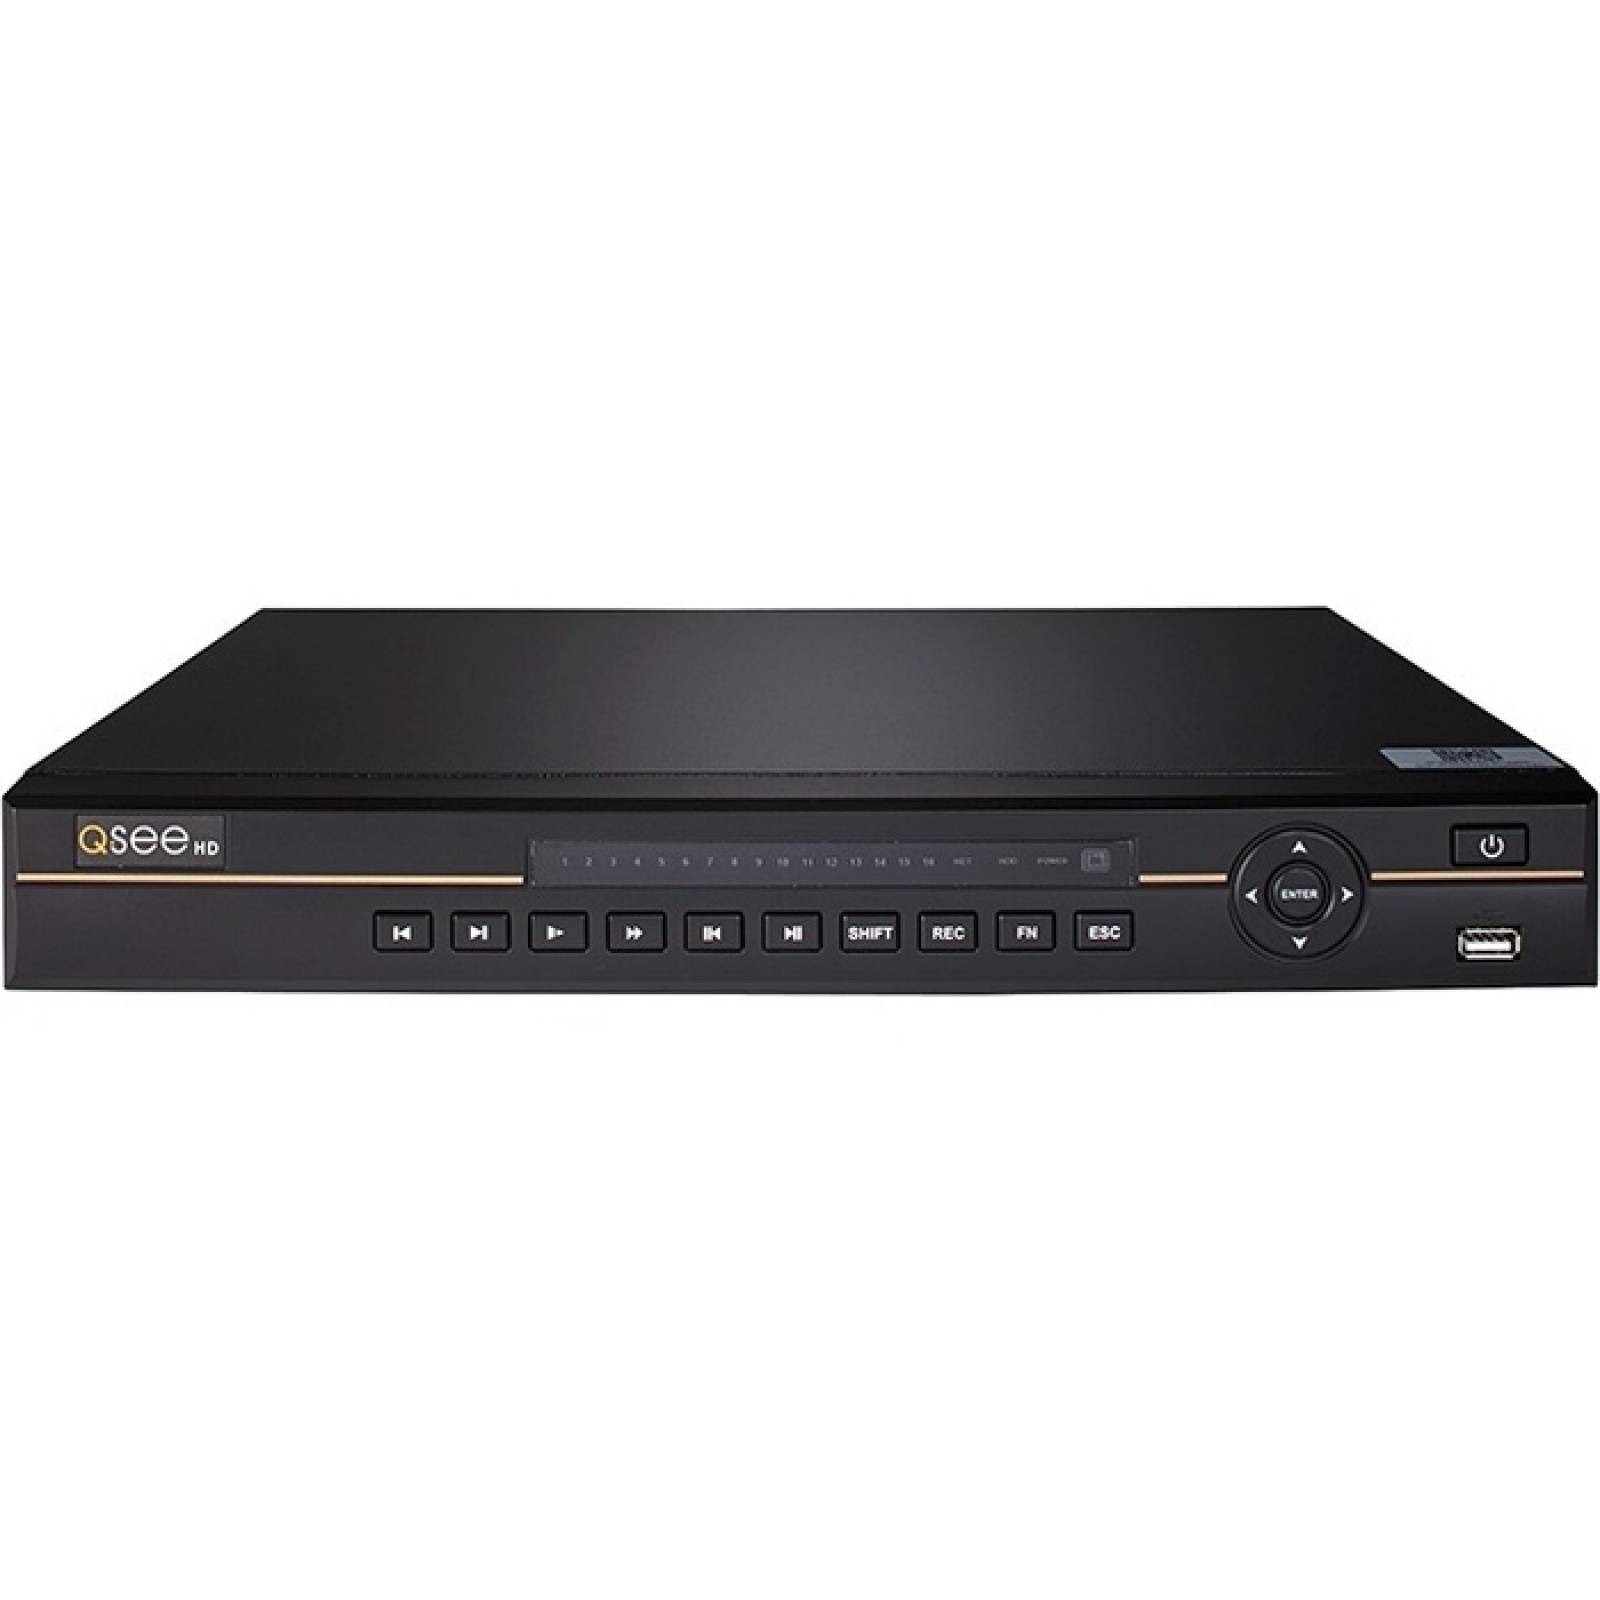 Qsee 8CH 4K IP NVR 8 POE IVA H265